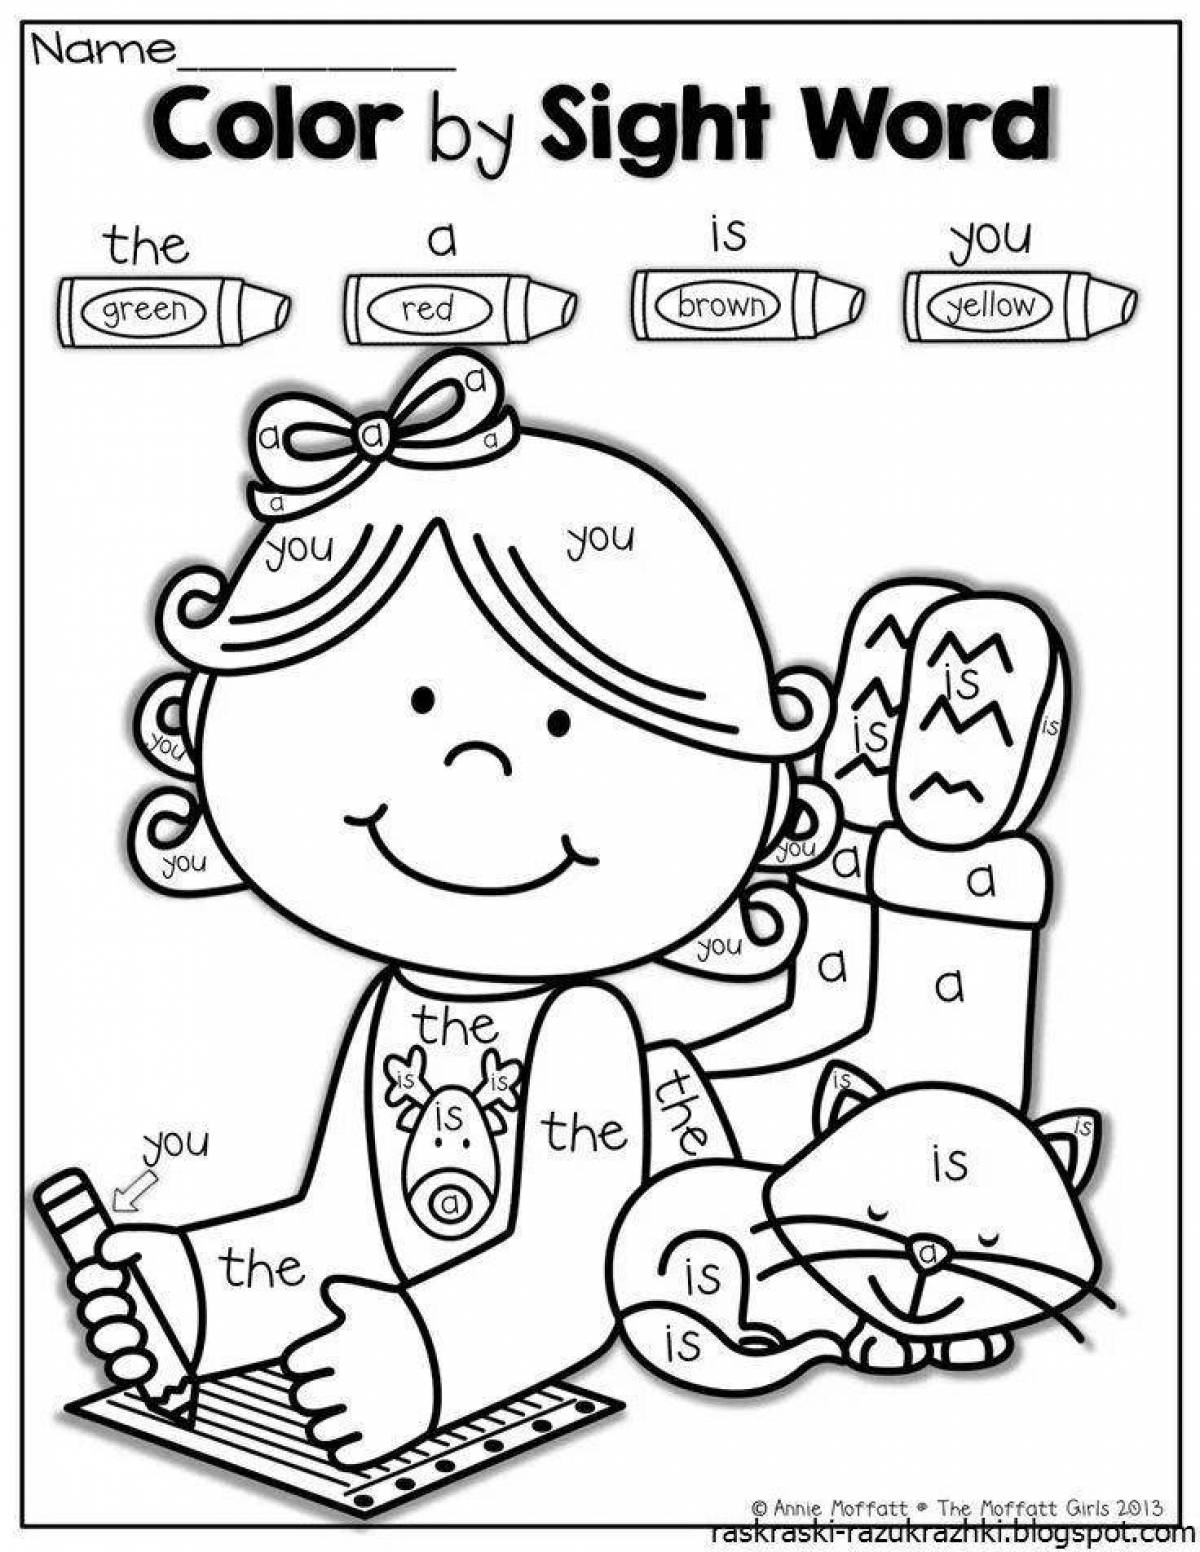 Colorful English coloring activity